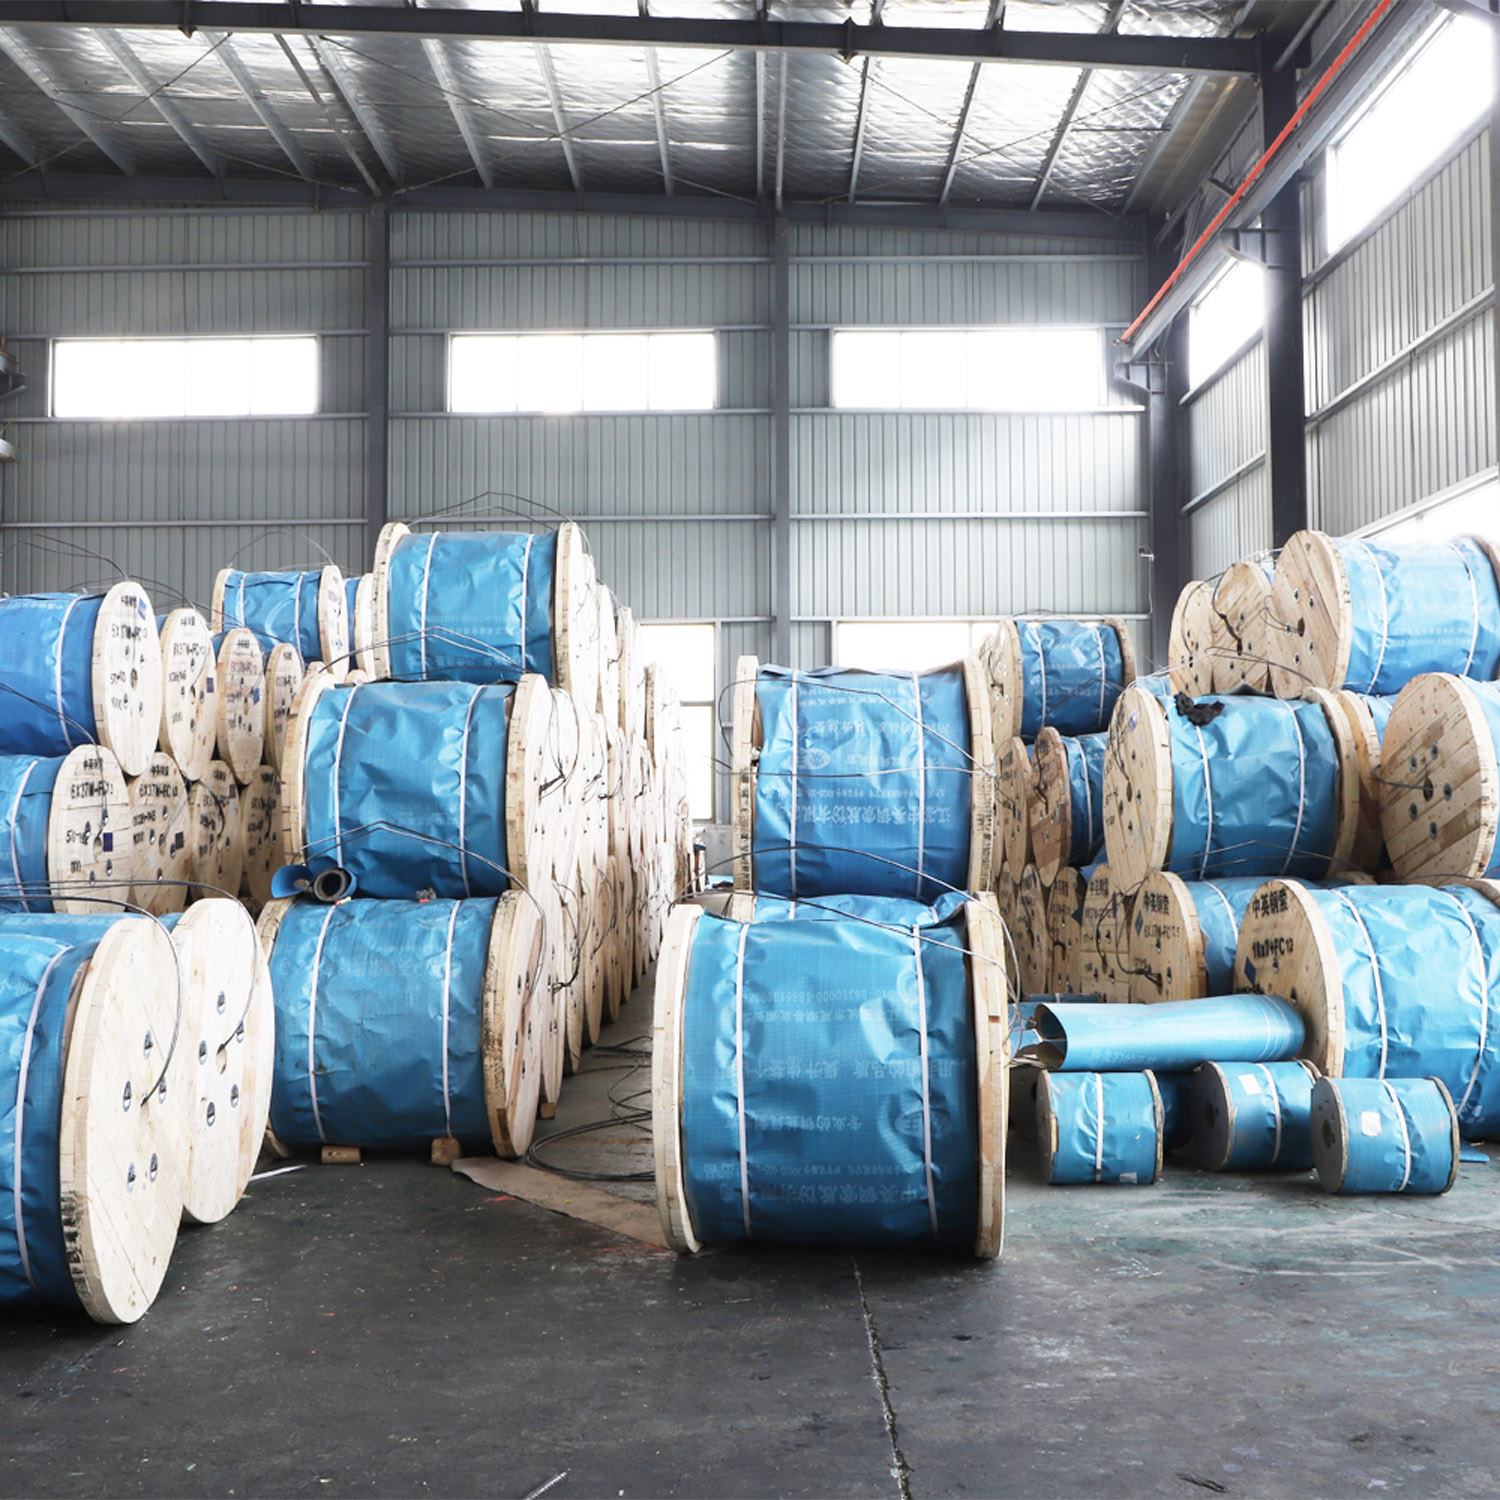 1x7 7x7 1x19 6x19 FC IWS Rope Price Hoisting Cableway Steel Wire Rope Aircraft Cable